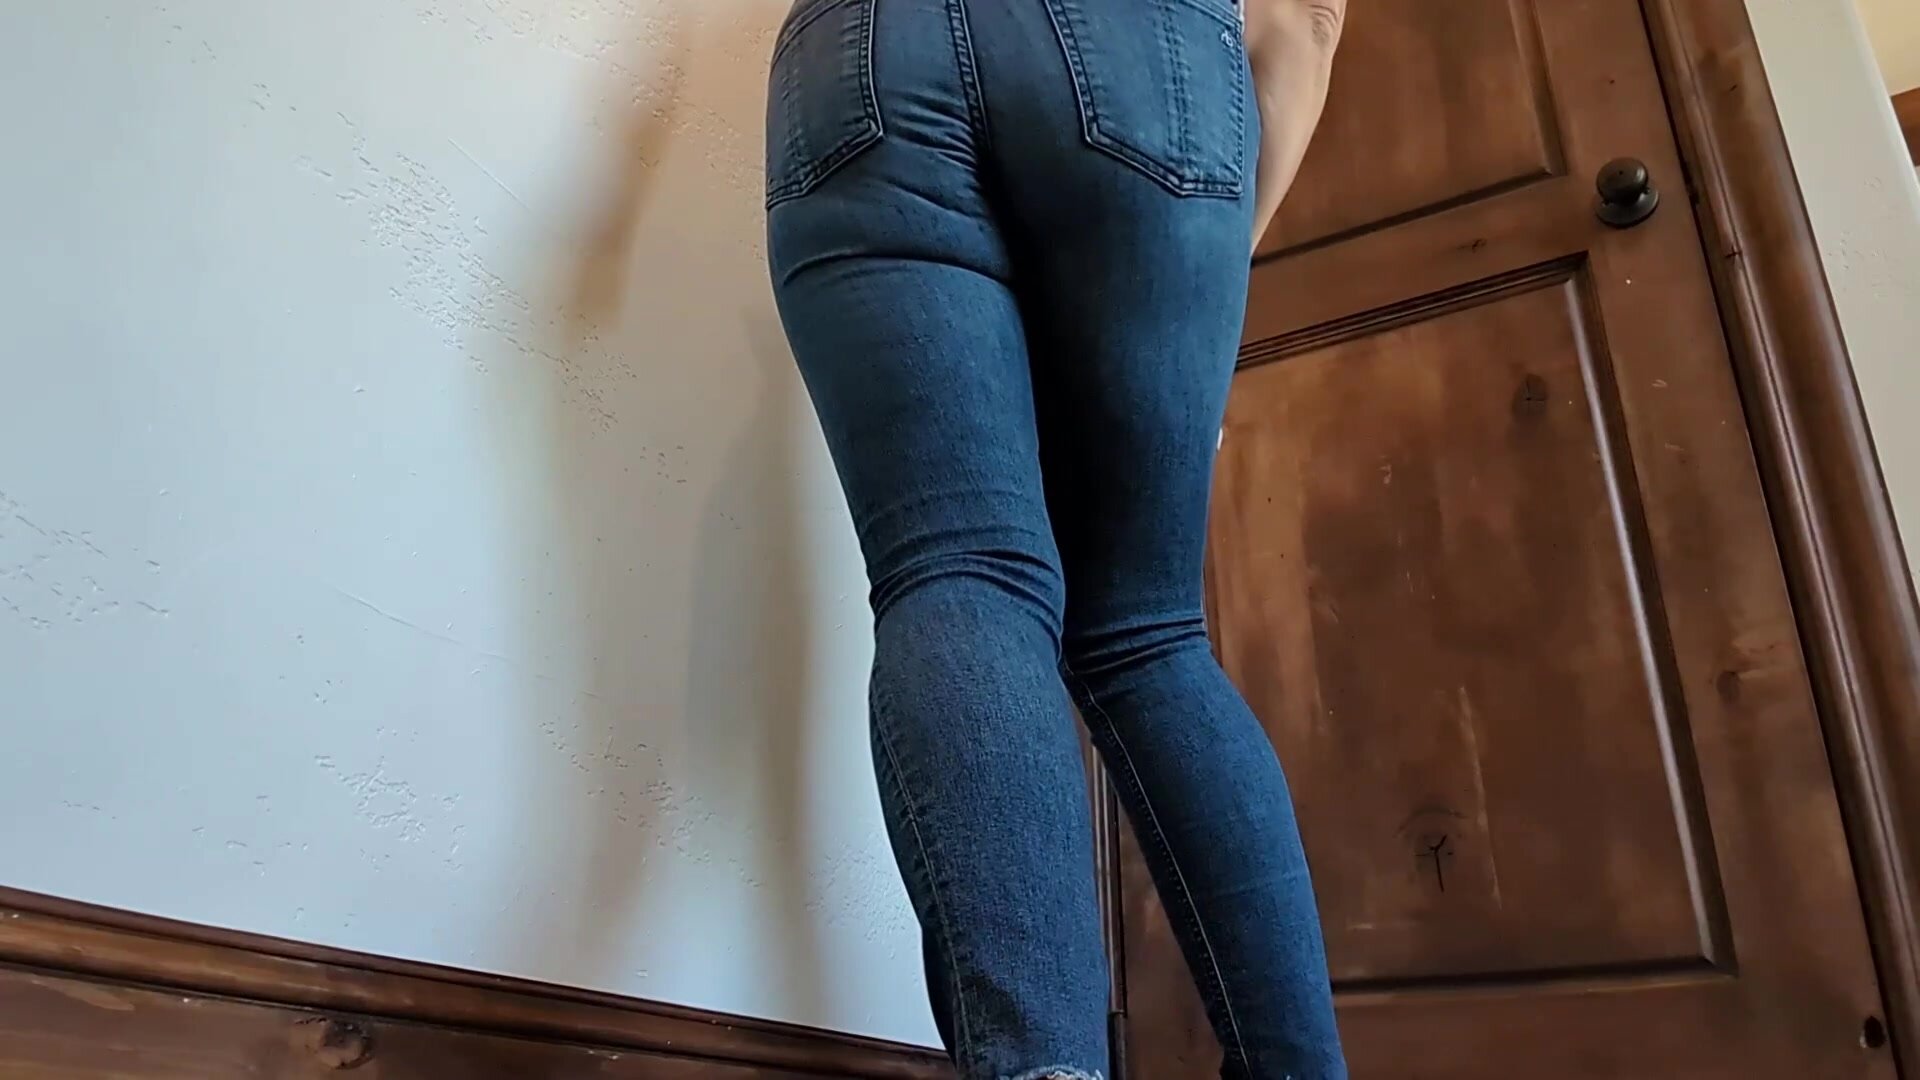 Big shit in tight jeans